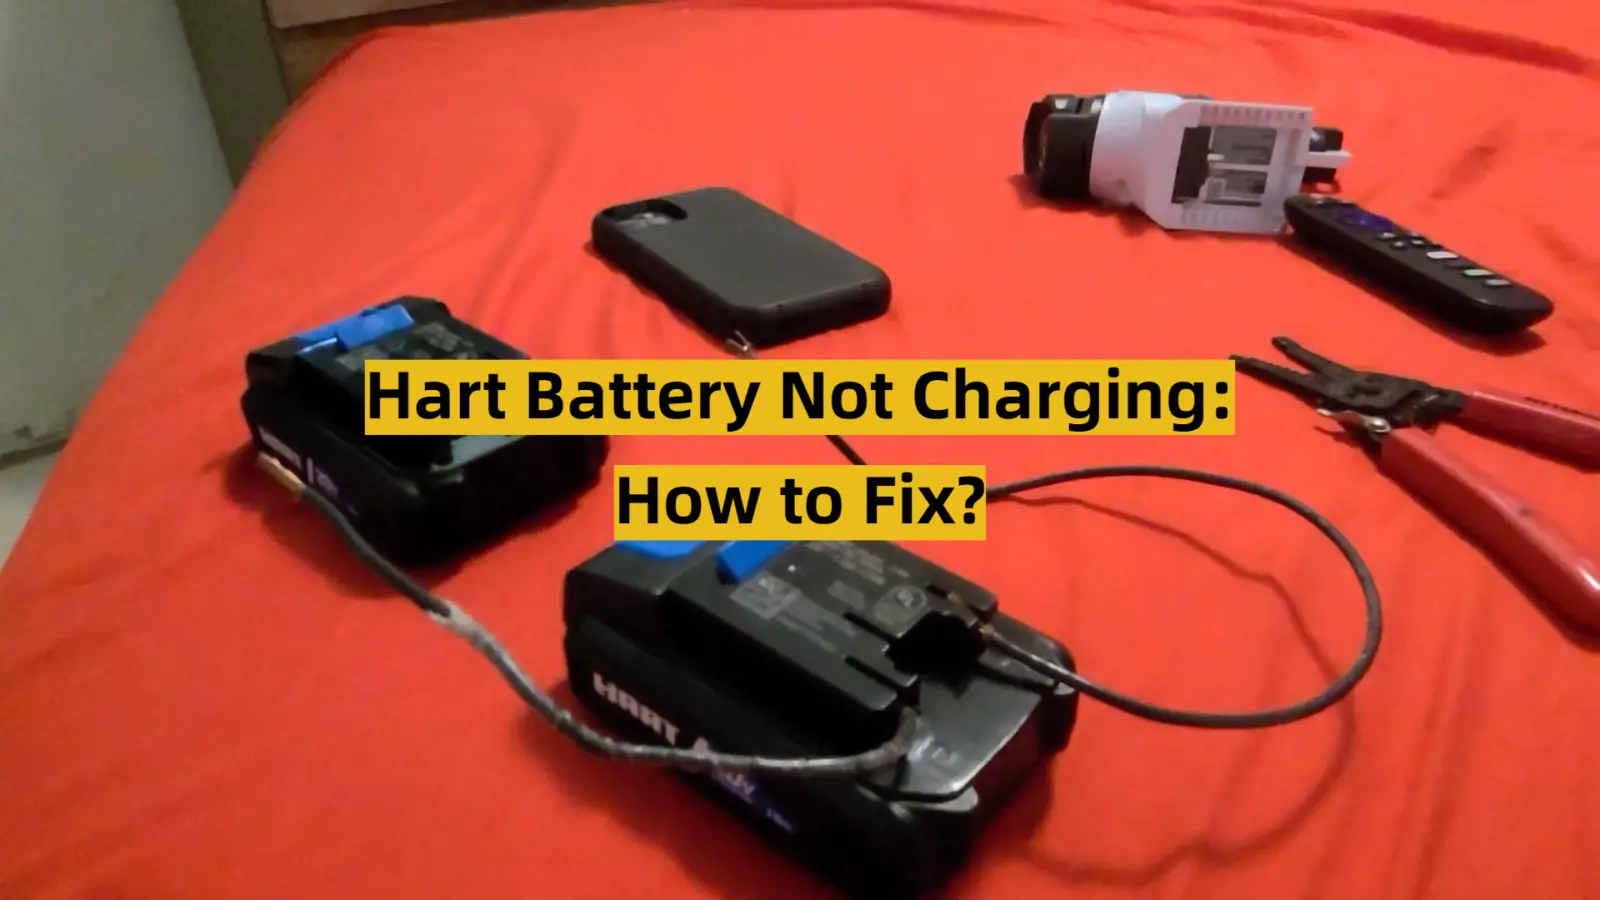 Hart Battery Not Charging: How to Fix?